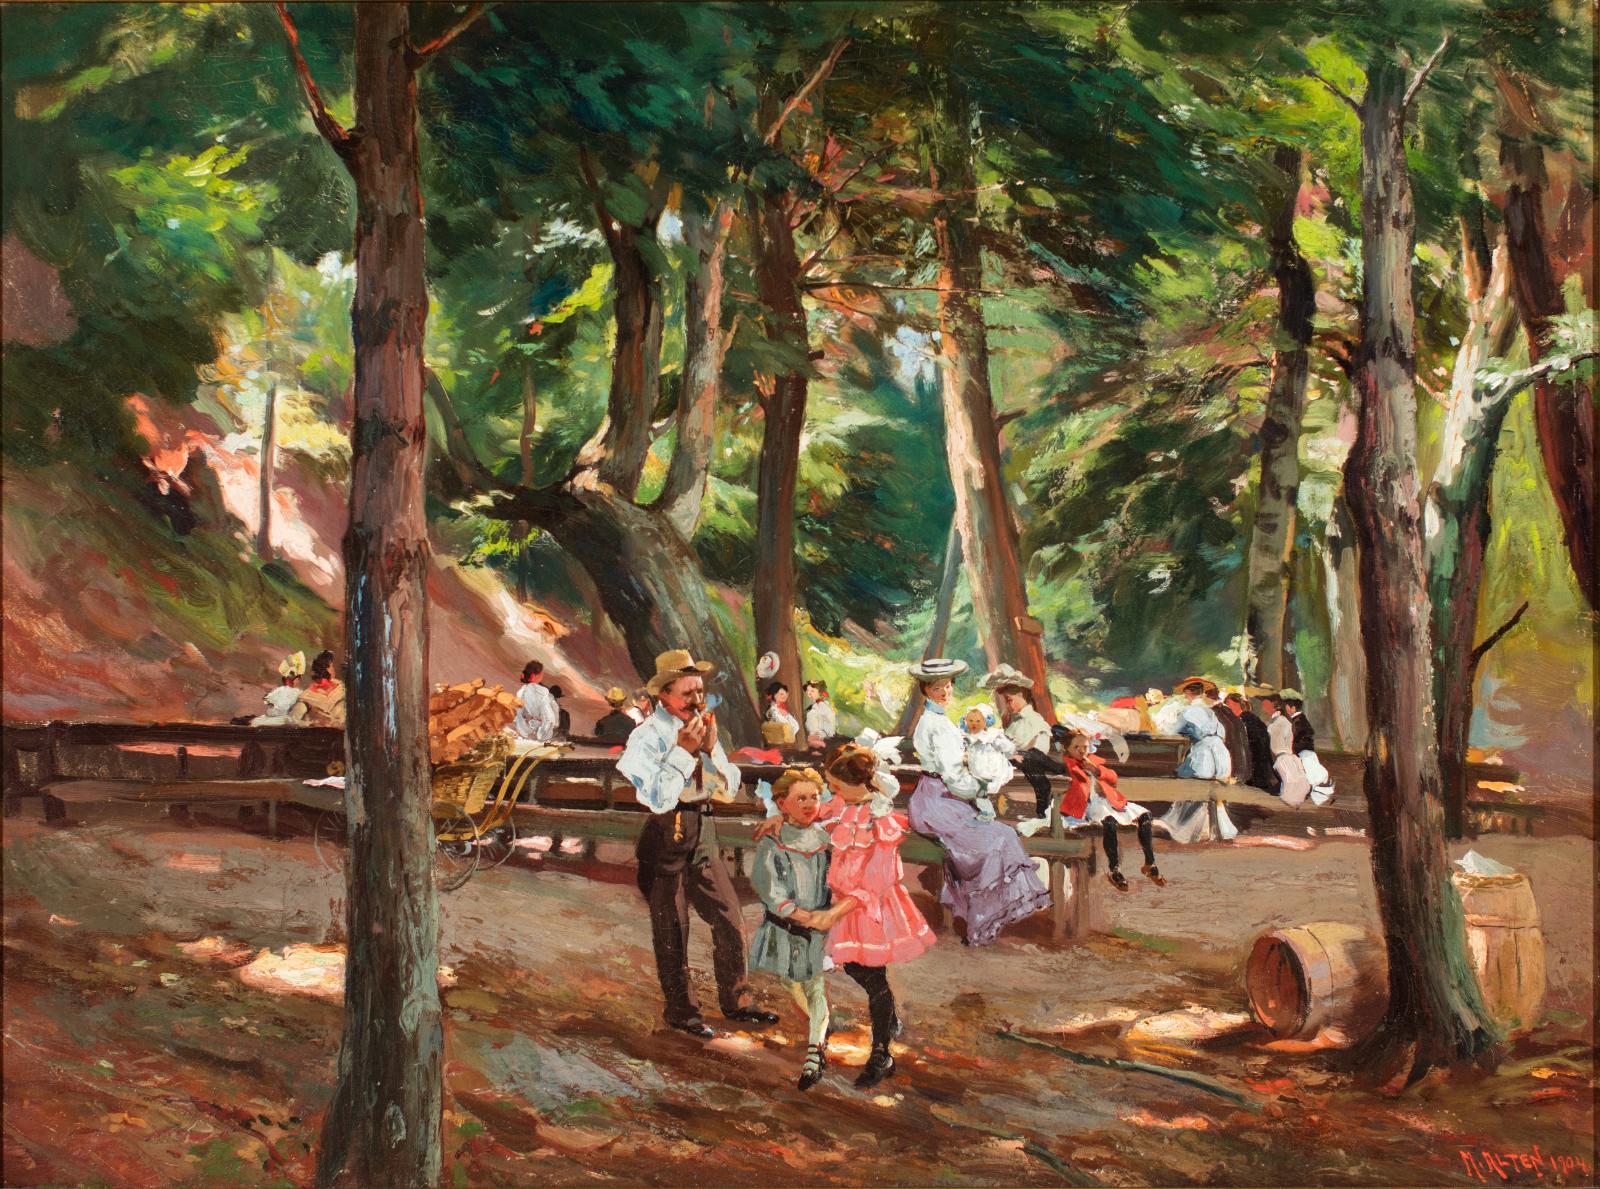 Gathering in a clearing in the woods with picnic tables.